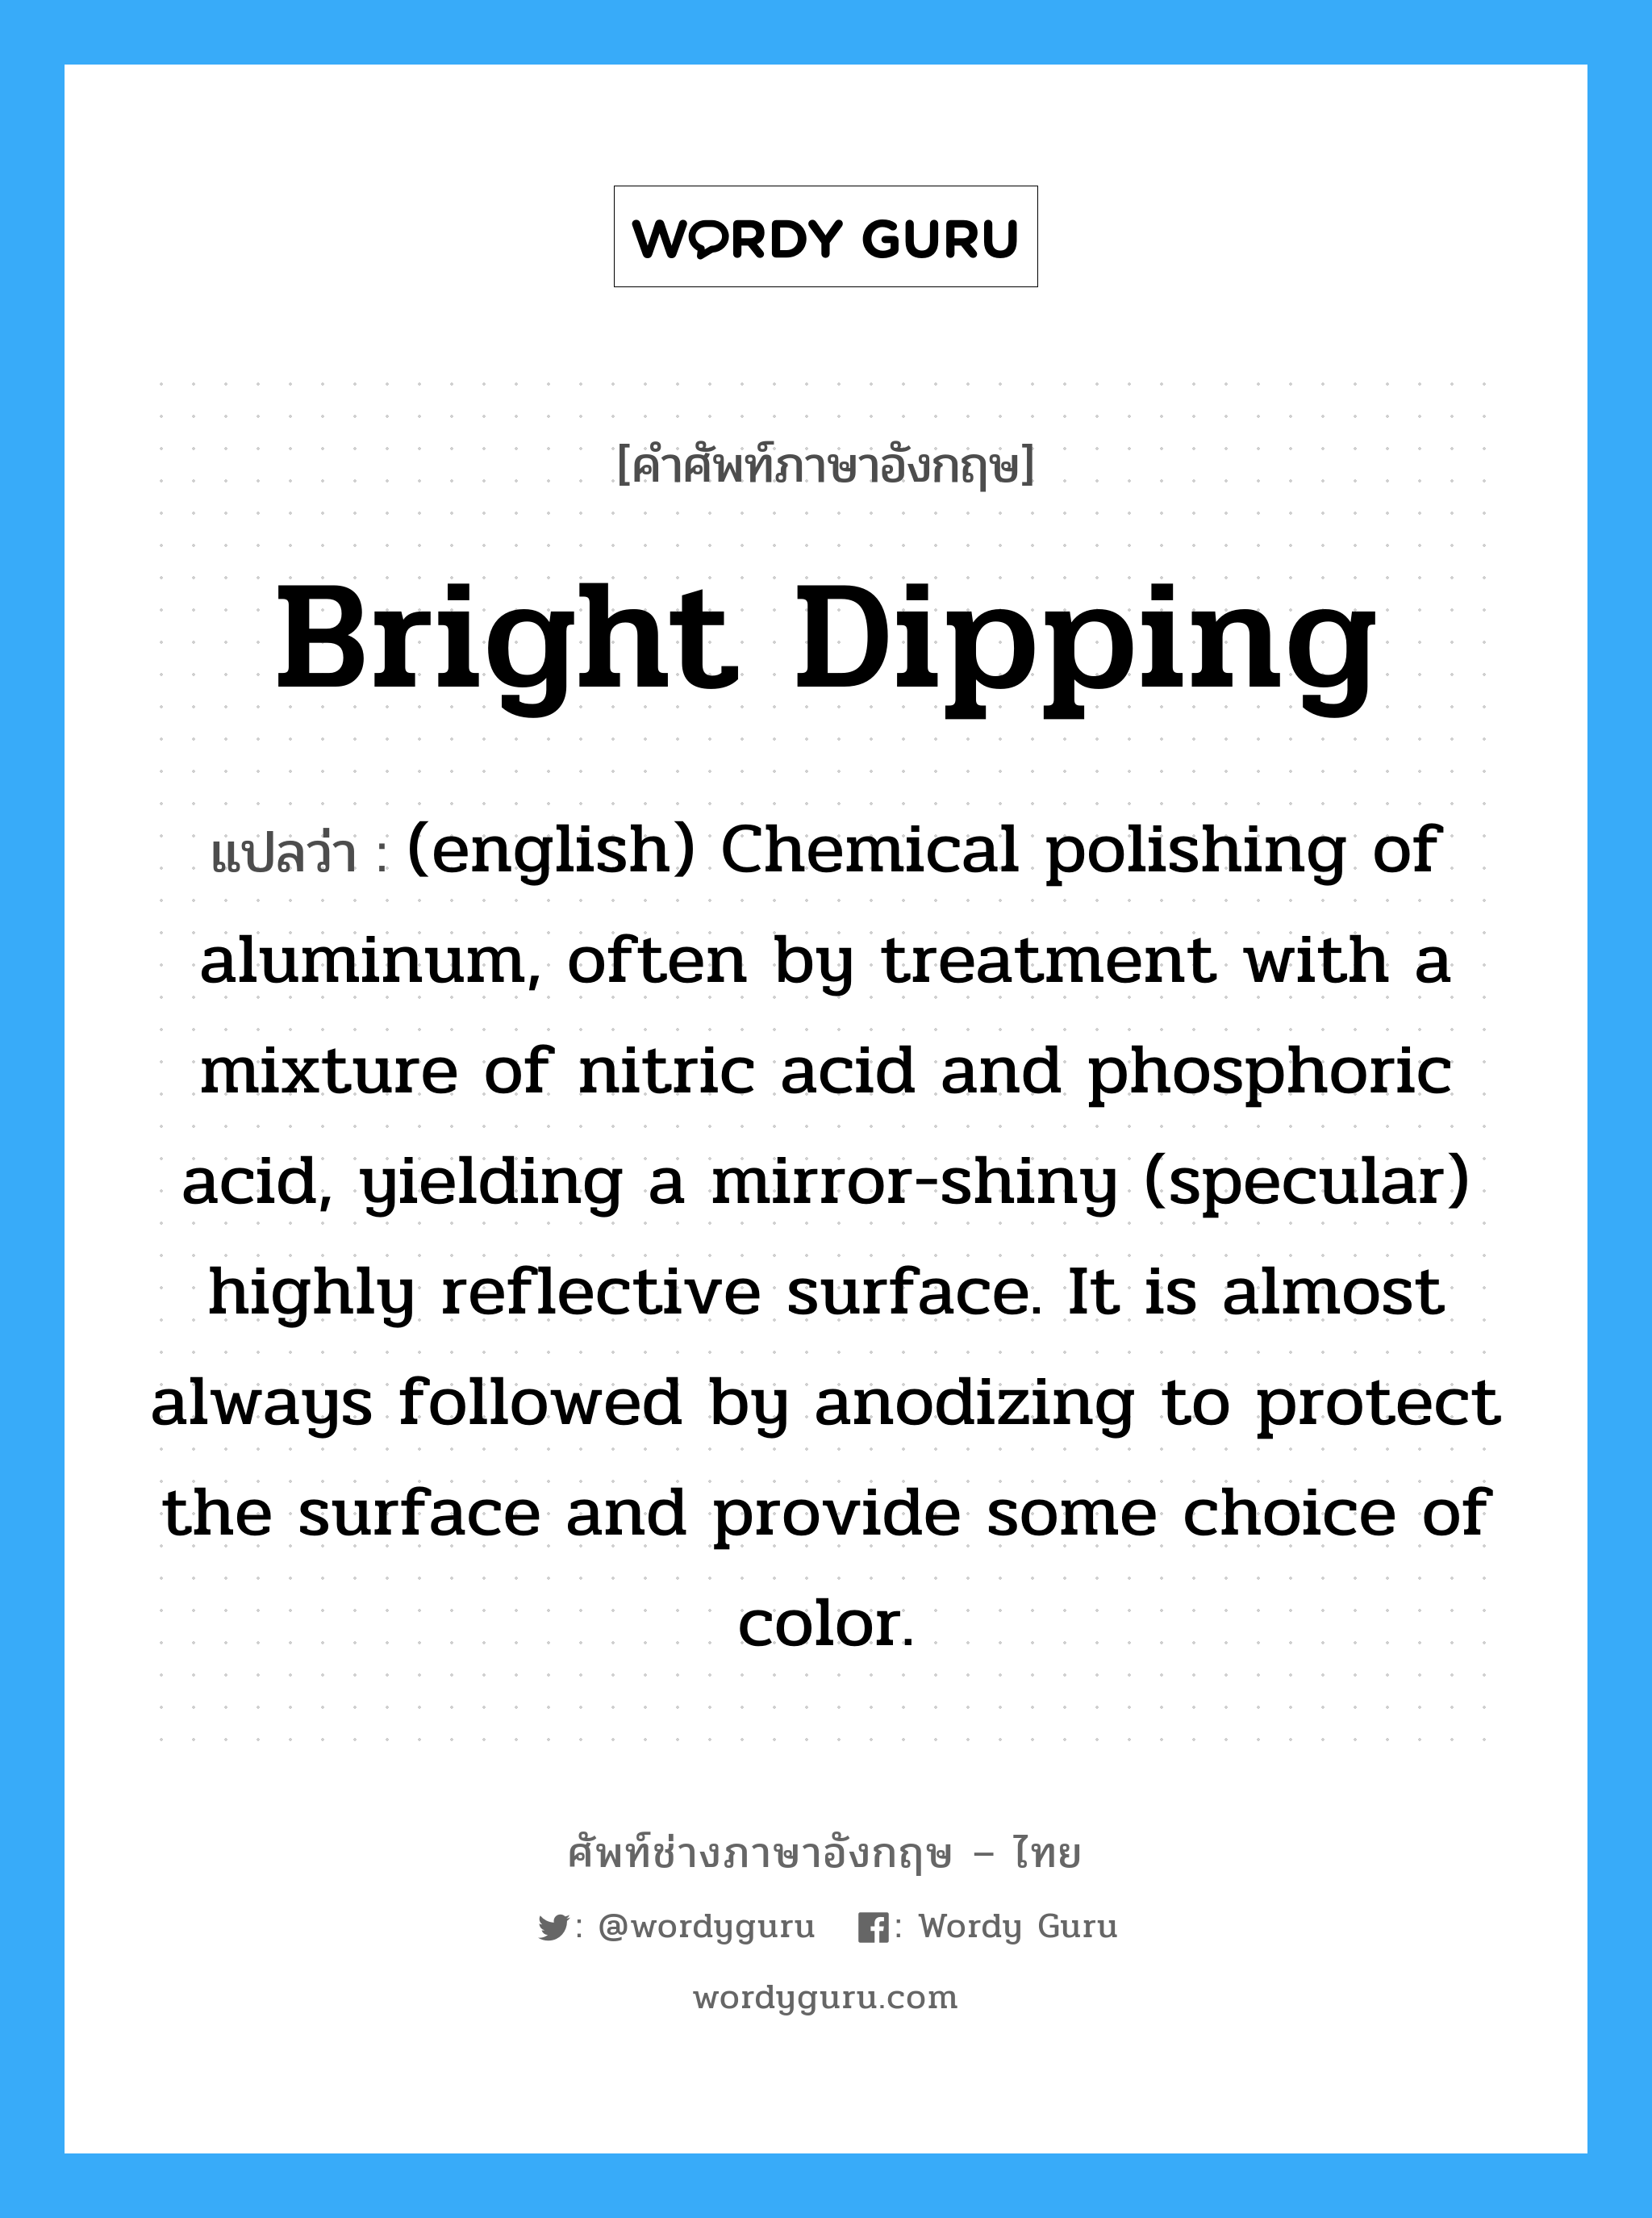 Bright Dipping แปลว่า?, คำศัพท์ช่างภาษาอังกฤษ - ไทย Bright Dipping คำศัพท์ภาษาอังกฤษ Bright Dipping แปลว่า (english) Chemical polishing of aluminum, often by treatment with a mixture of nitric acid and phosphoric acid, yielding a mirror-shiny (specular) highly reflective surface. It is almost always followed by anodizing to protect the surface and provide some choice of color.